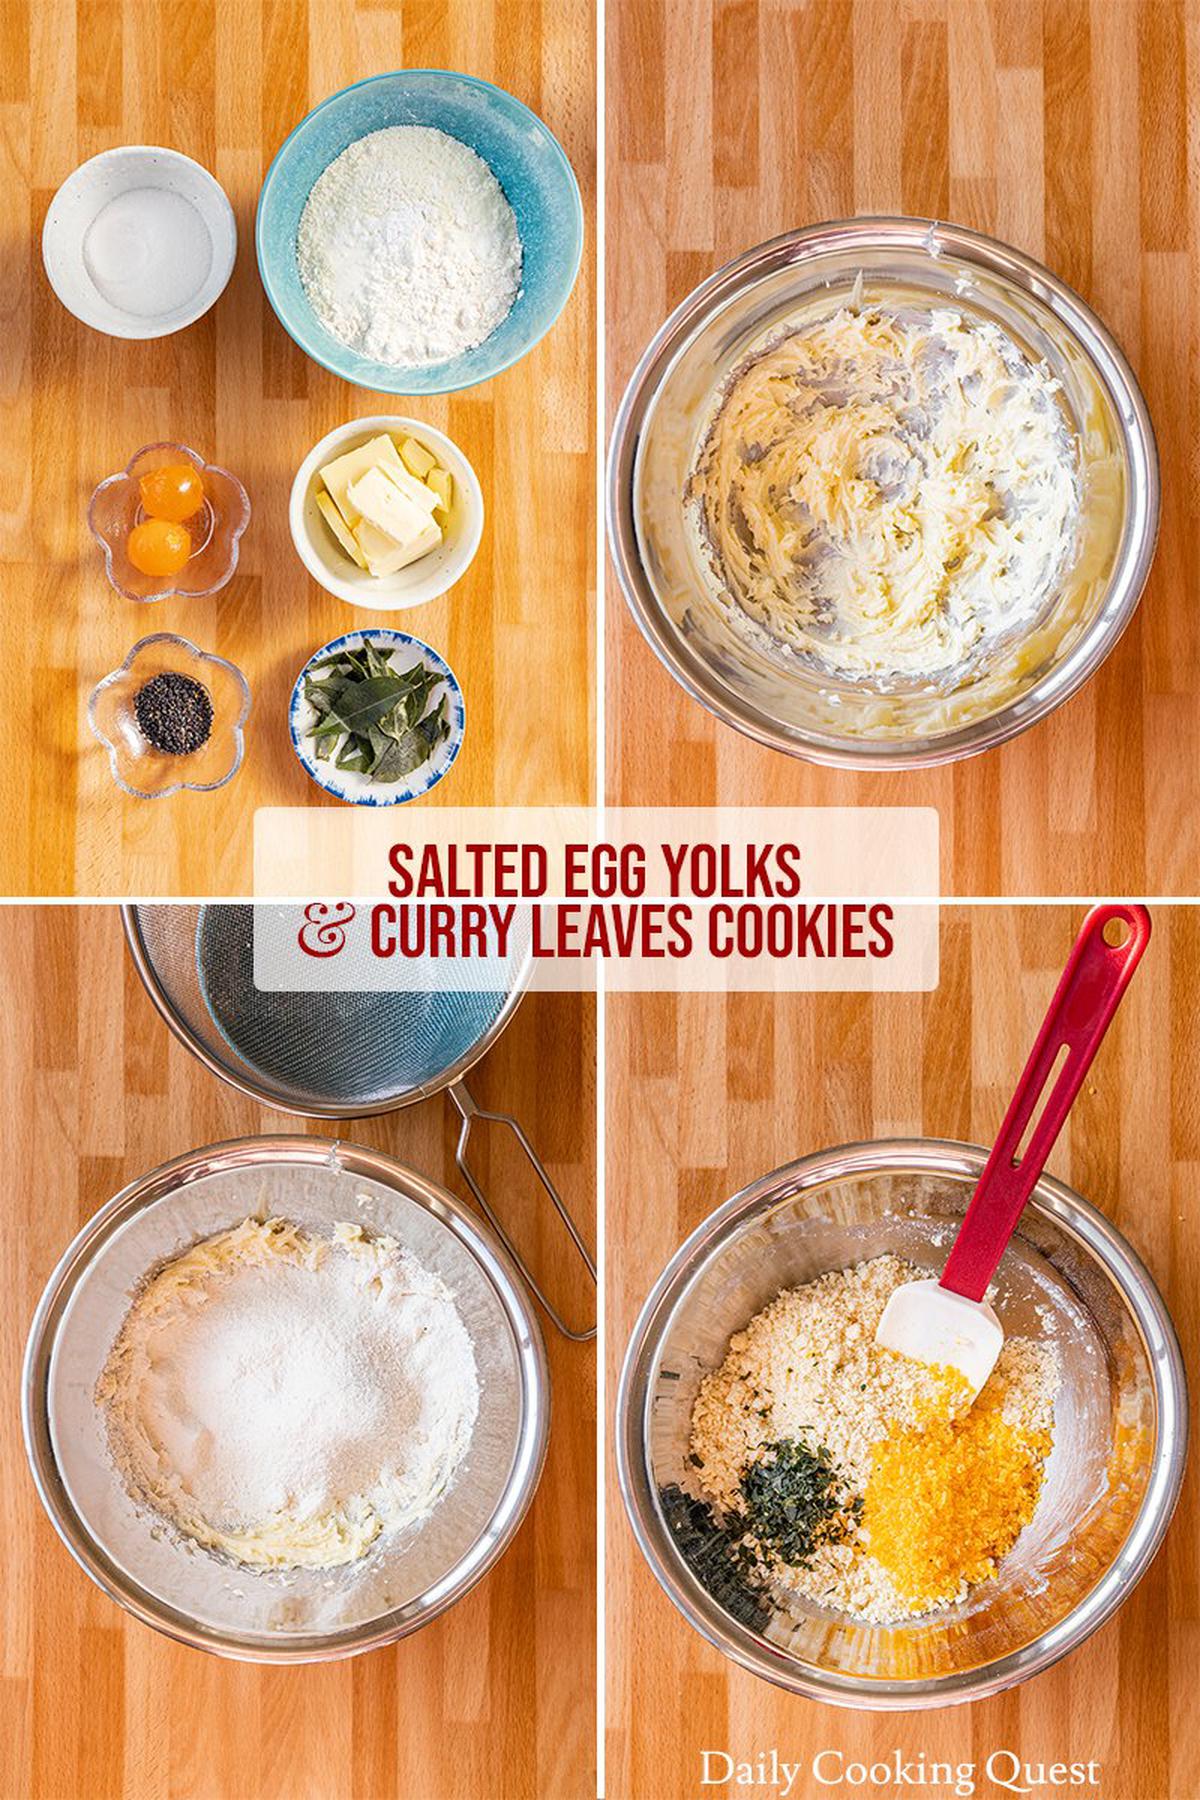 (1) Ingredients for salted egg yolks and curry leaves cookies. (2) Cream butter and sugar. (3) Sieve in flour, milk powder, cornstarch, baking powder, and salt. (4) Add mashed steamed salted egg yolks and finely chopped curry leaves.